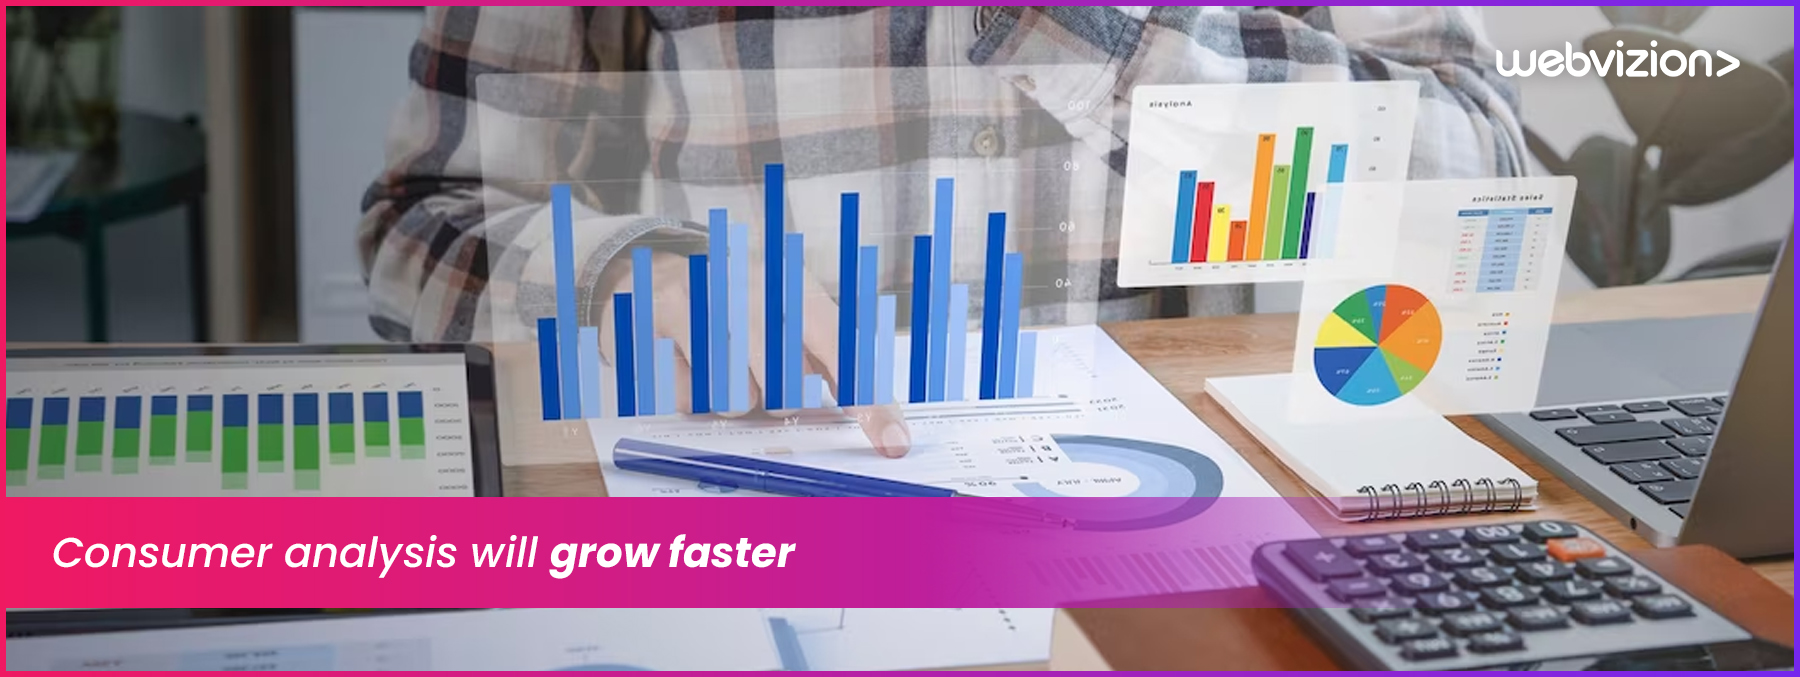 Consumer-analysis-will-grow-faster-Webvizion-Global